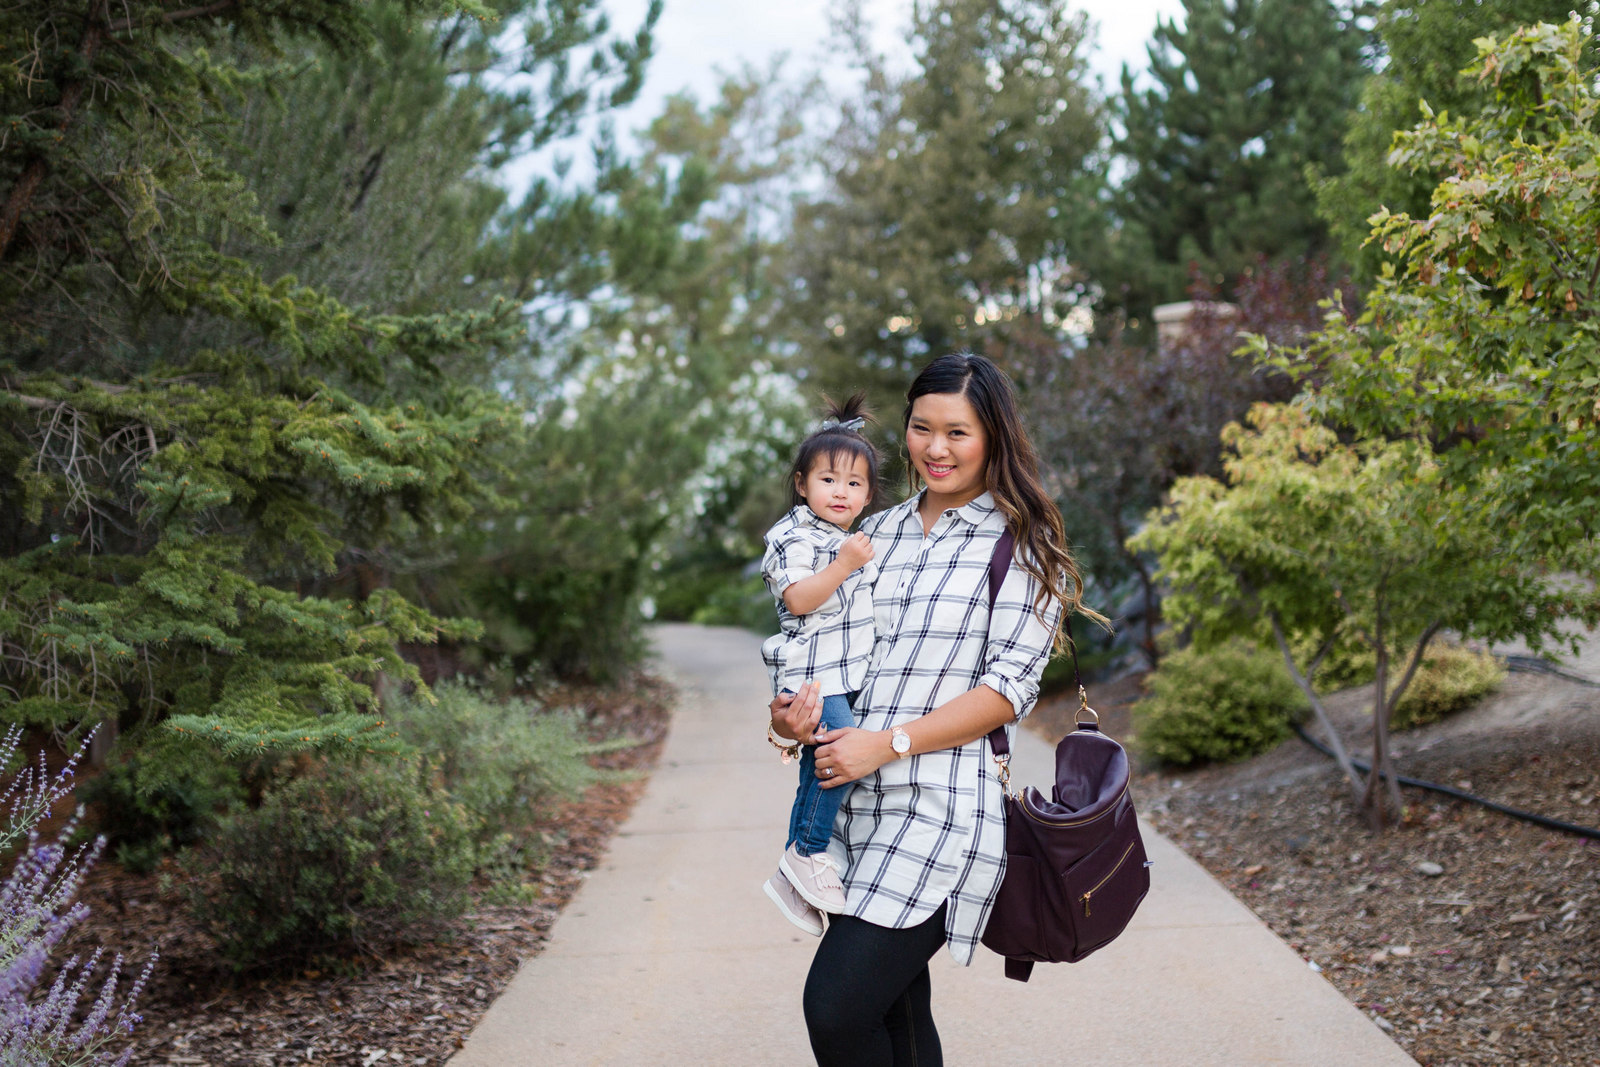 Mommy and me outfits: Old Navy style